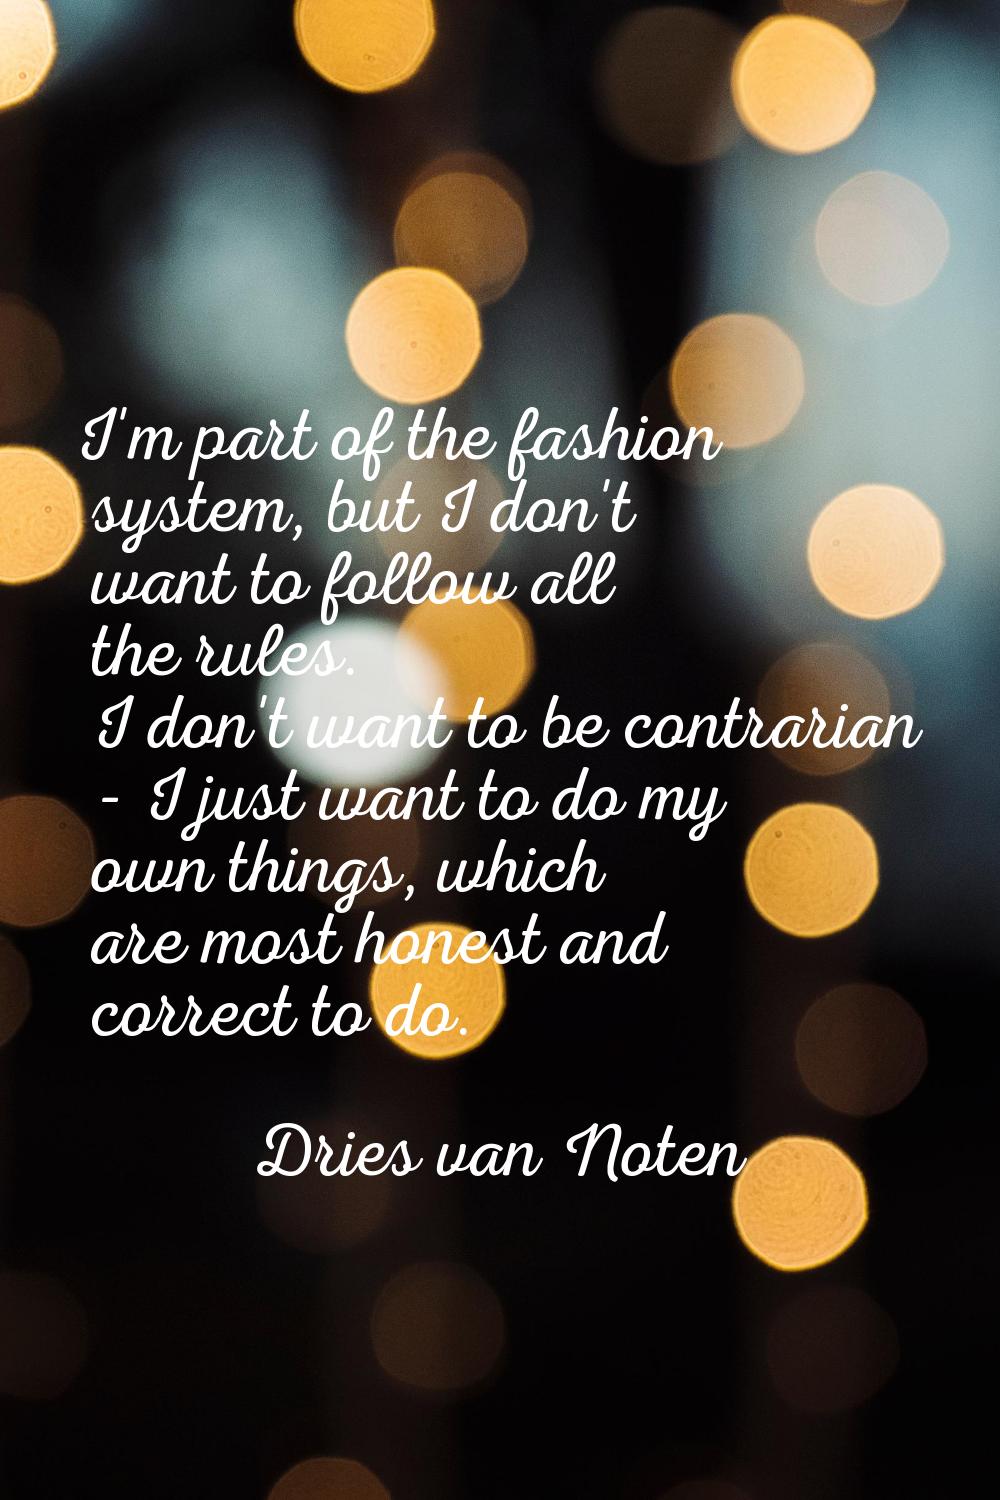 I'm part of the fashion system, but I don't want to follow all the rules. I don't want to be contra